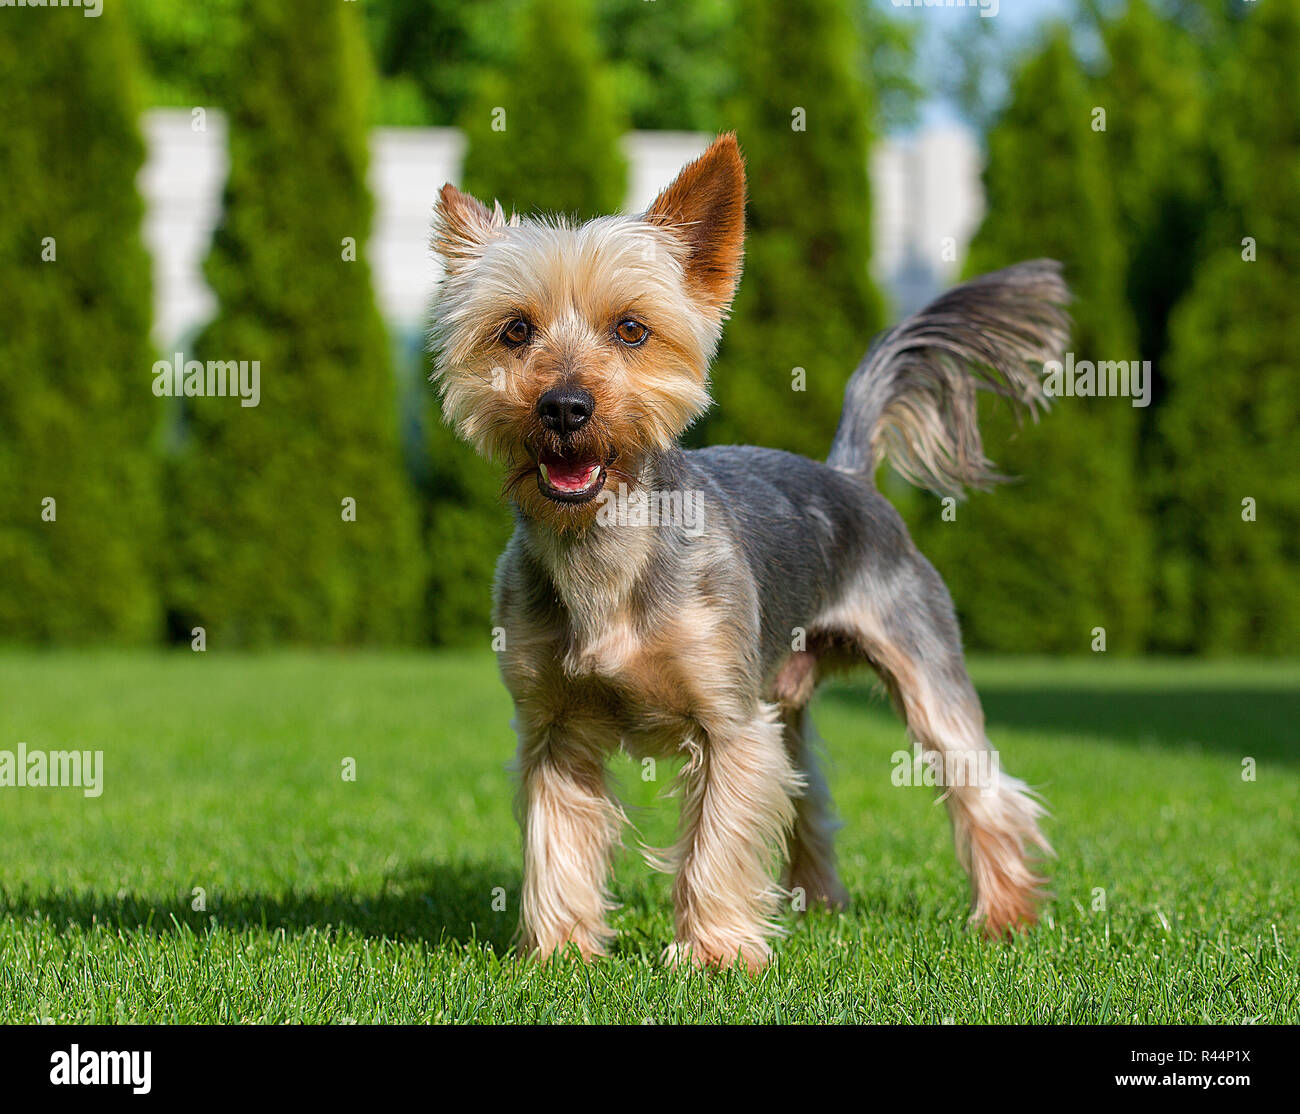 An adorable Australian Silky Terrier posing on fresh mowed lawn in hot summer sunny day. Dog standing on fresh cut grass waiting for the command. Stock Photo